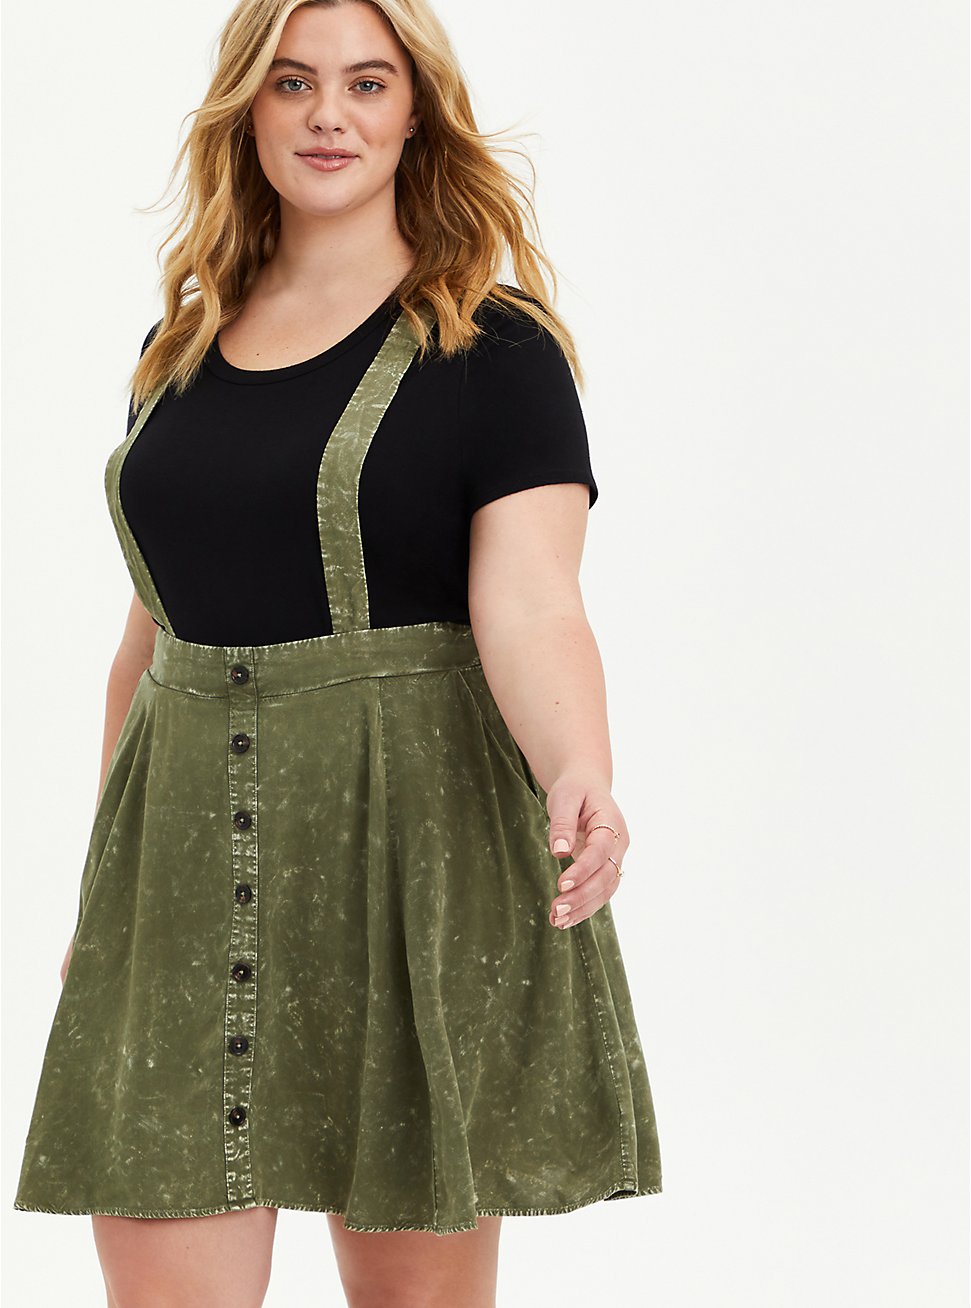 Plus Size Skirtall - Challis Mineral Wash Olive, DUSTY OLIVE, hi-res